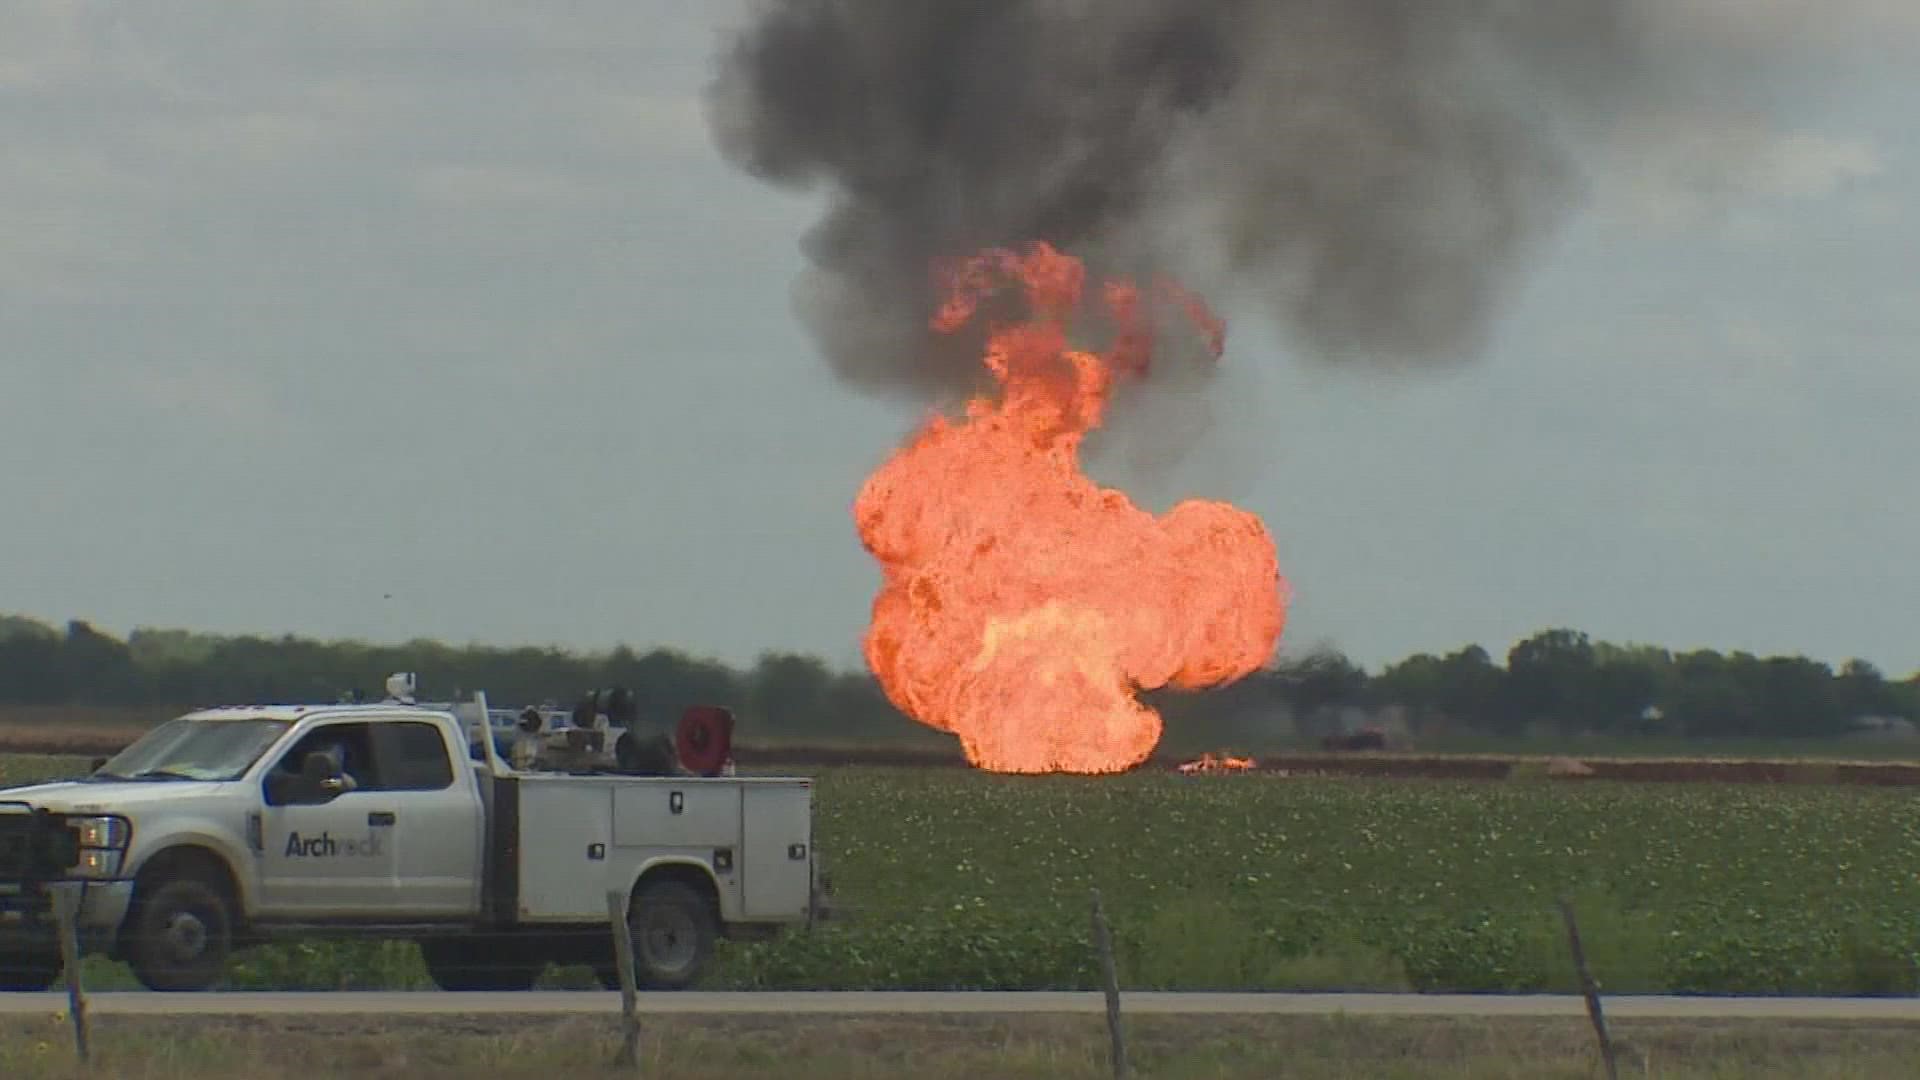 A natural gas line exploded in west Fort Bend County Thursday, July 7, causing small grass fires in the area. Crews were able to extinguish the flames within an hour